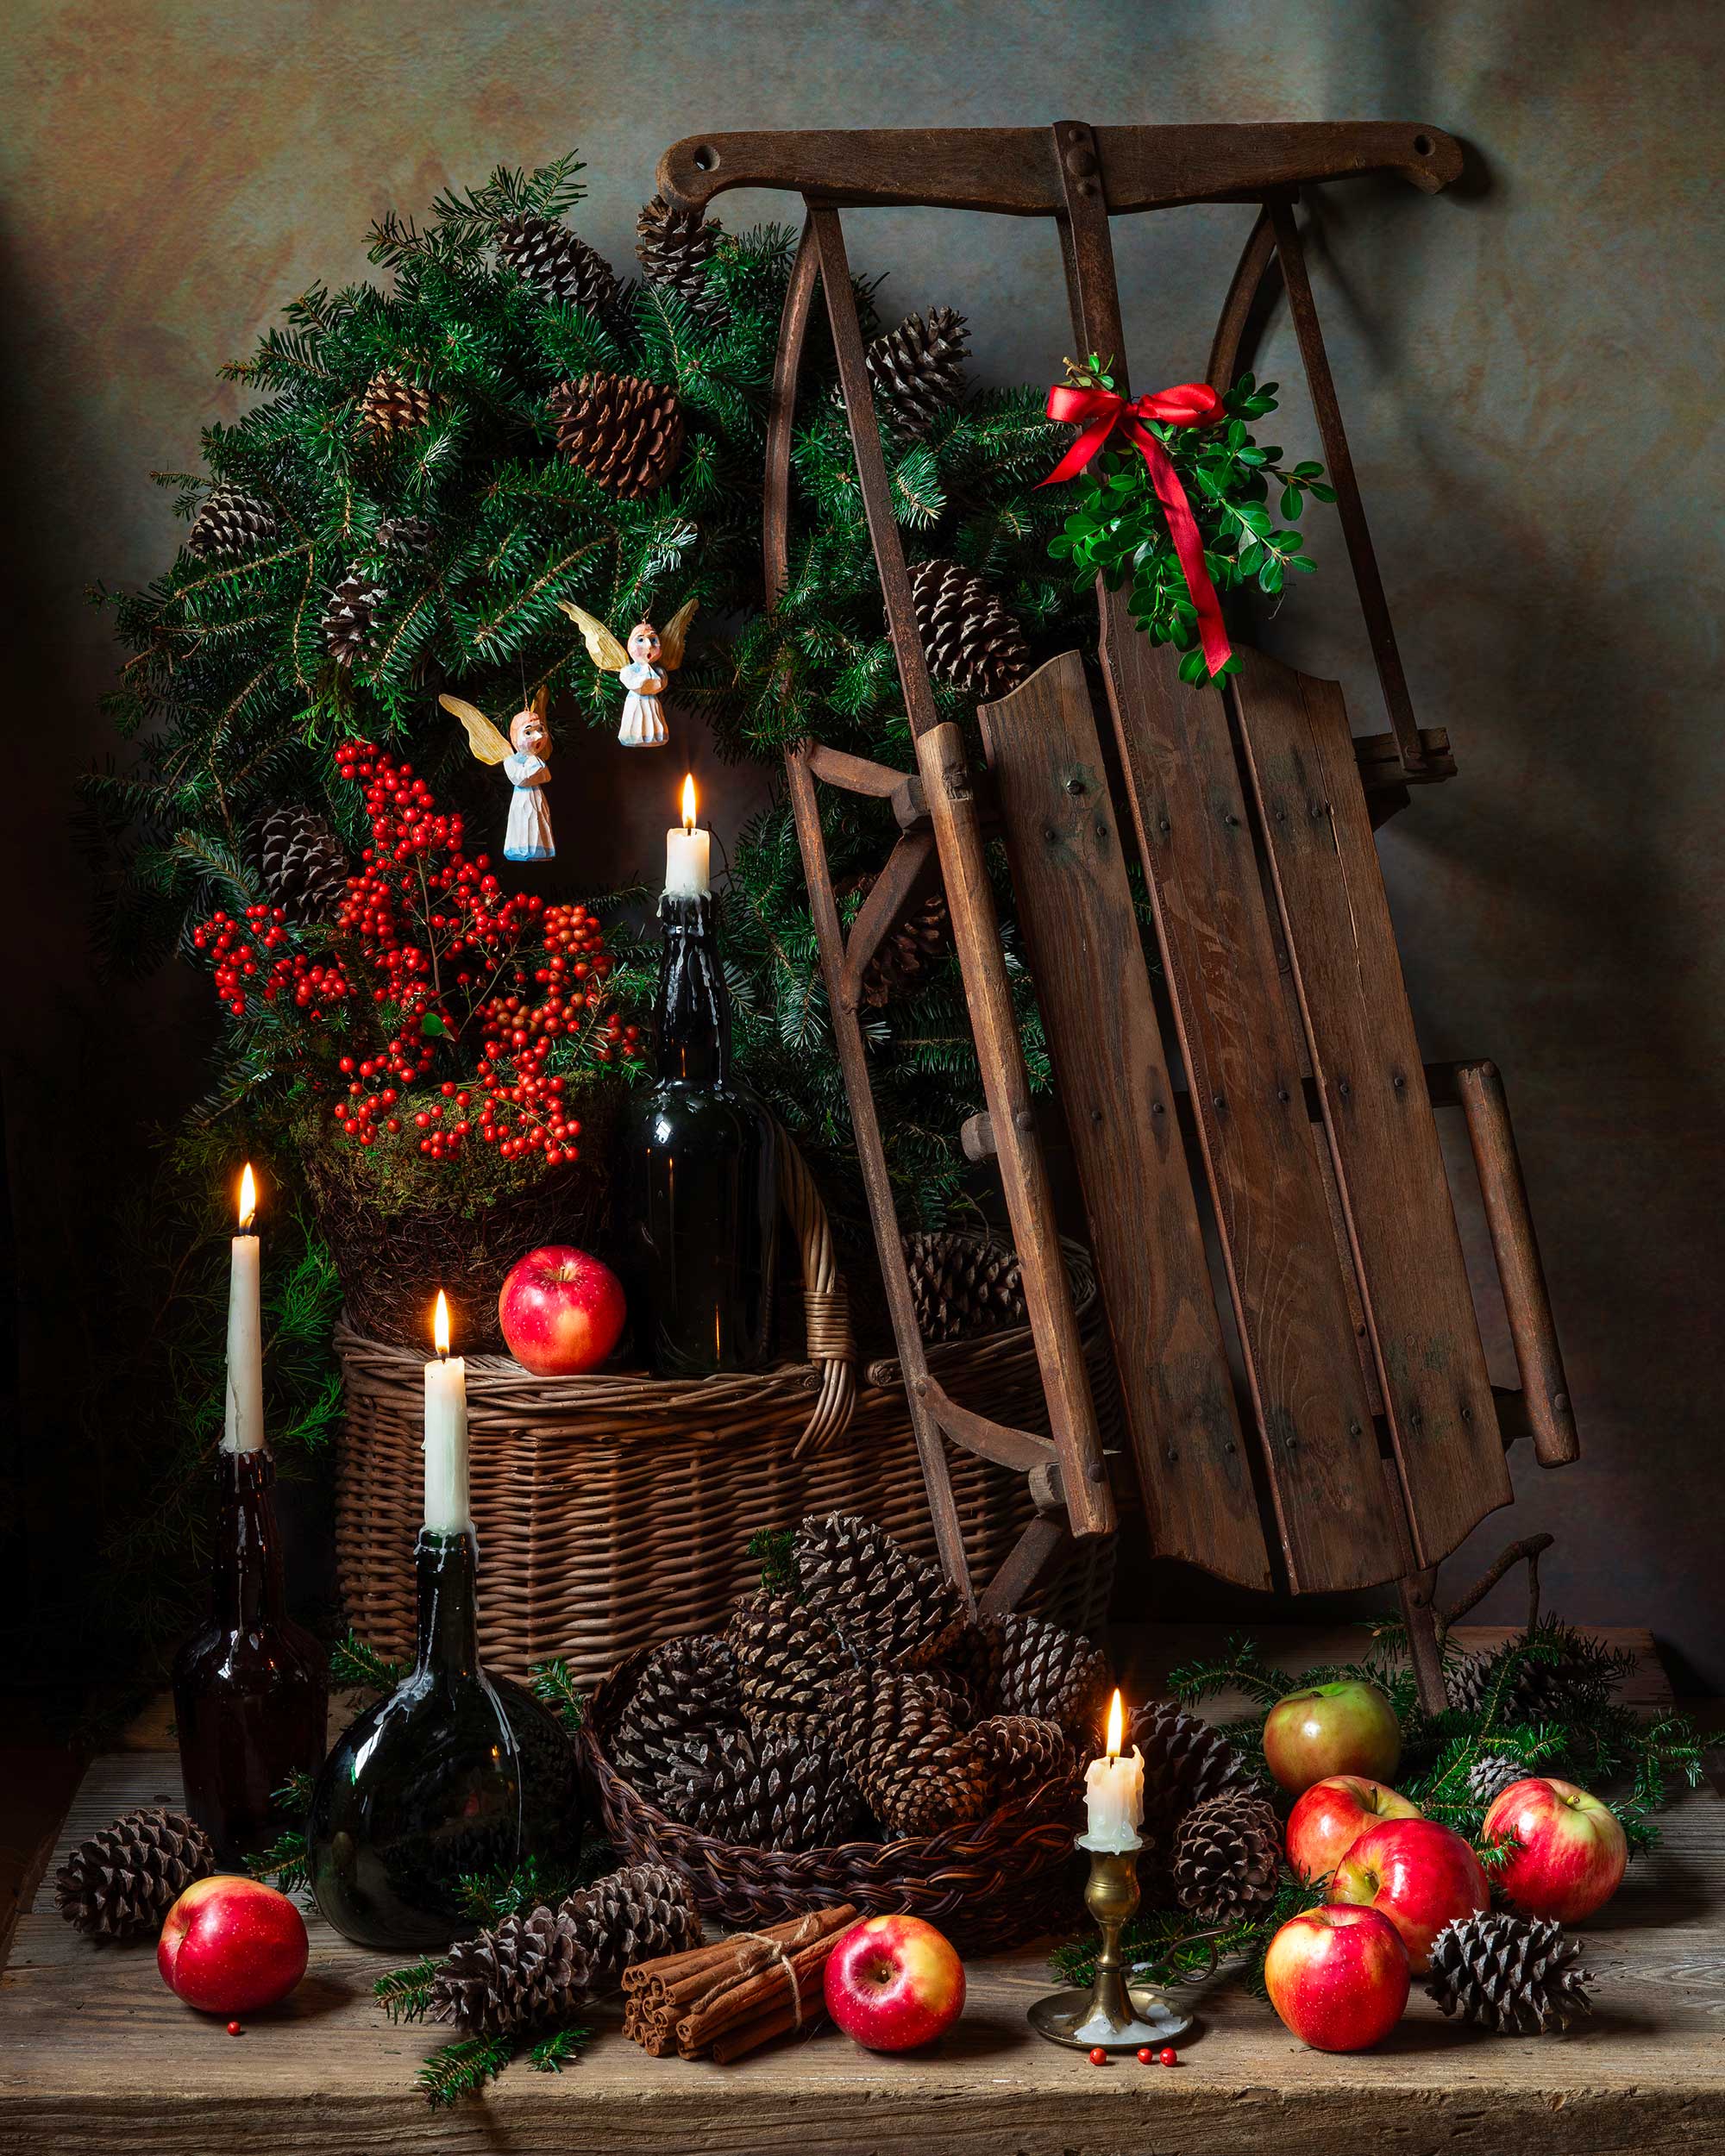 sled, christmas, apples, still life, wooden sled, christmas decor, festive, rustic, country christmas, angels, still life photography, pine cones, Слуцкая Яна